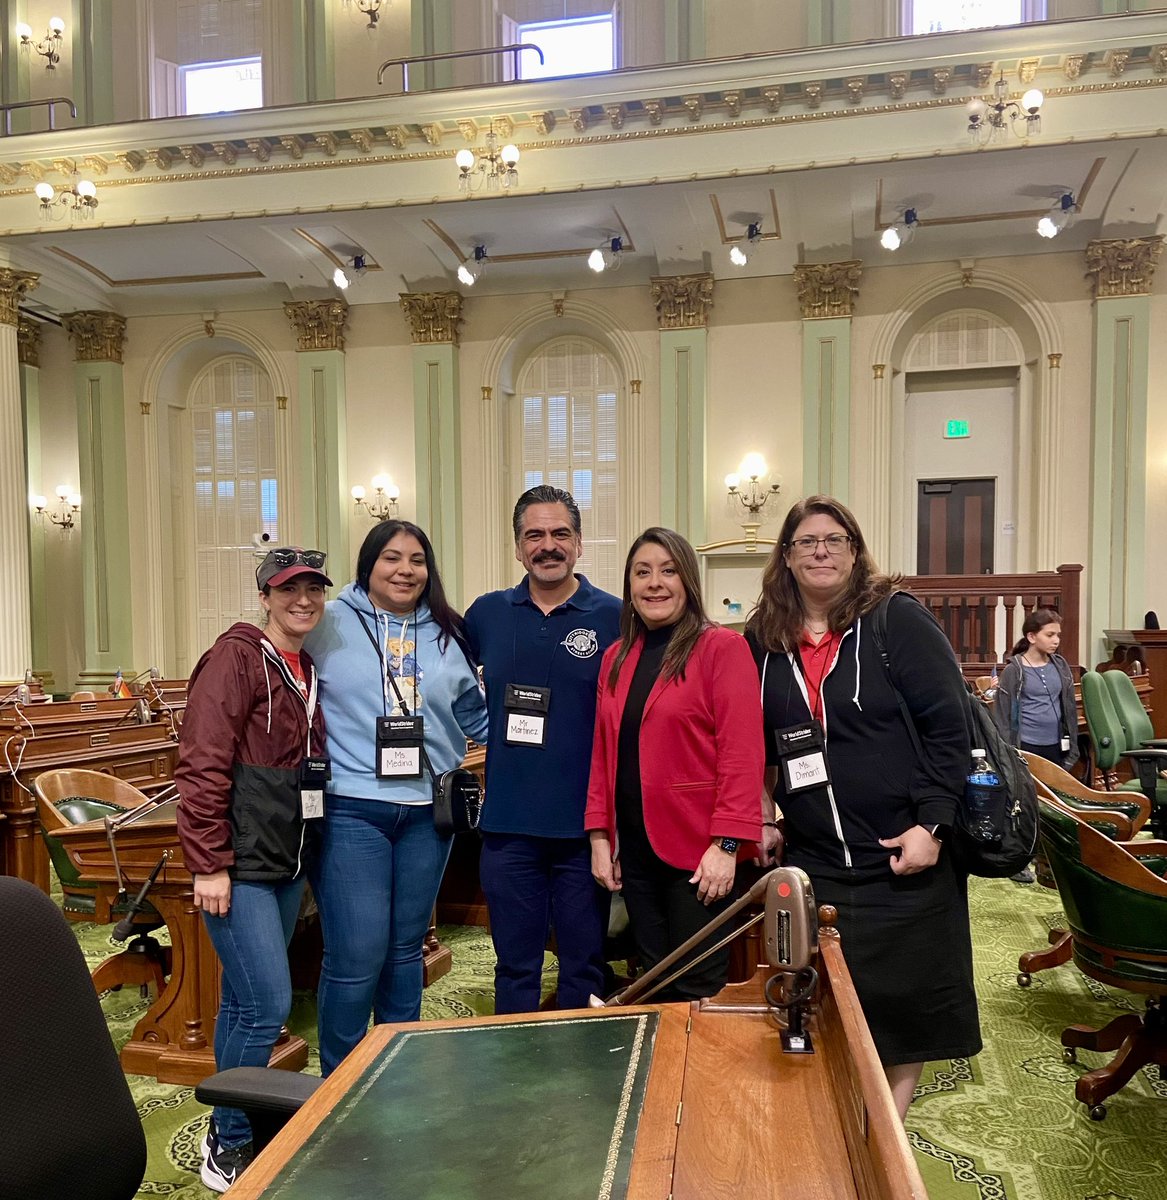 Kittridge Street Elementary School visited the State Capitol today! I love it when families and students from my community visit! I am honored to have the opportunity to speak to our future leaders! #AD43